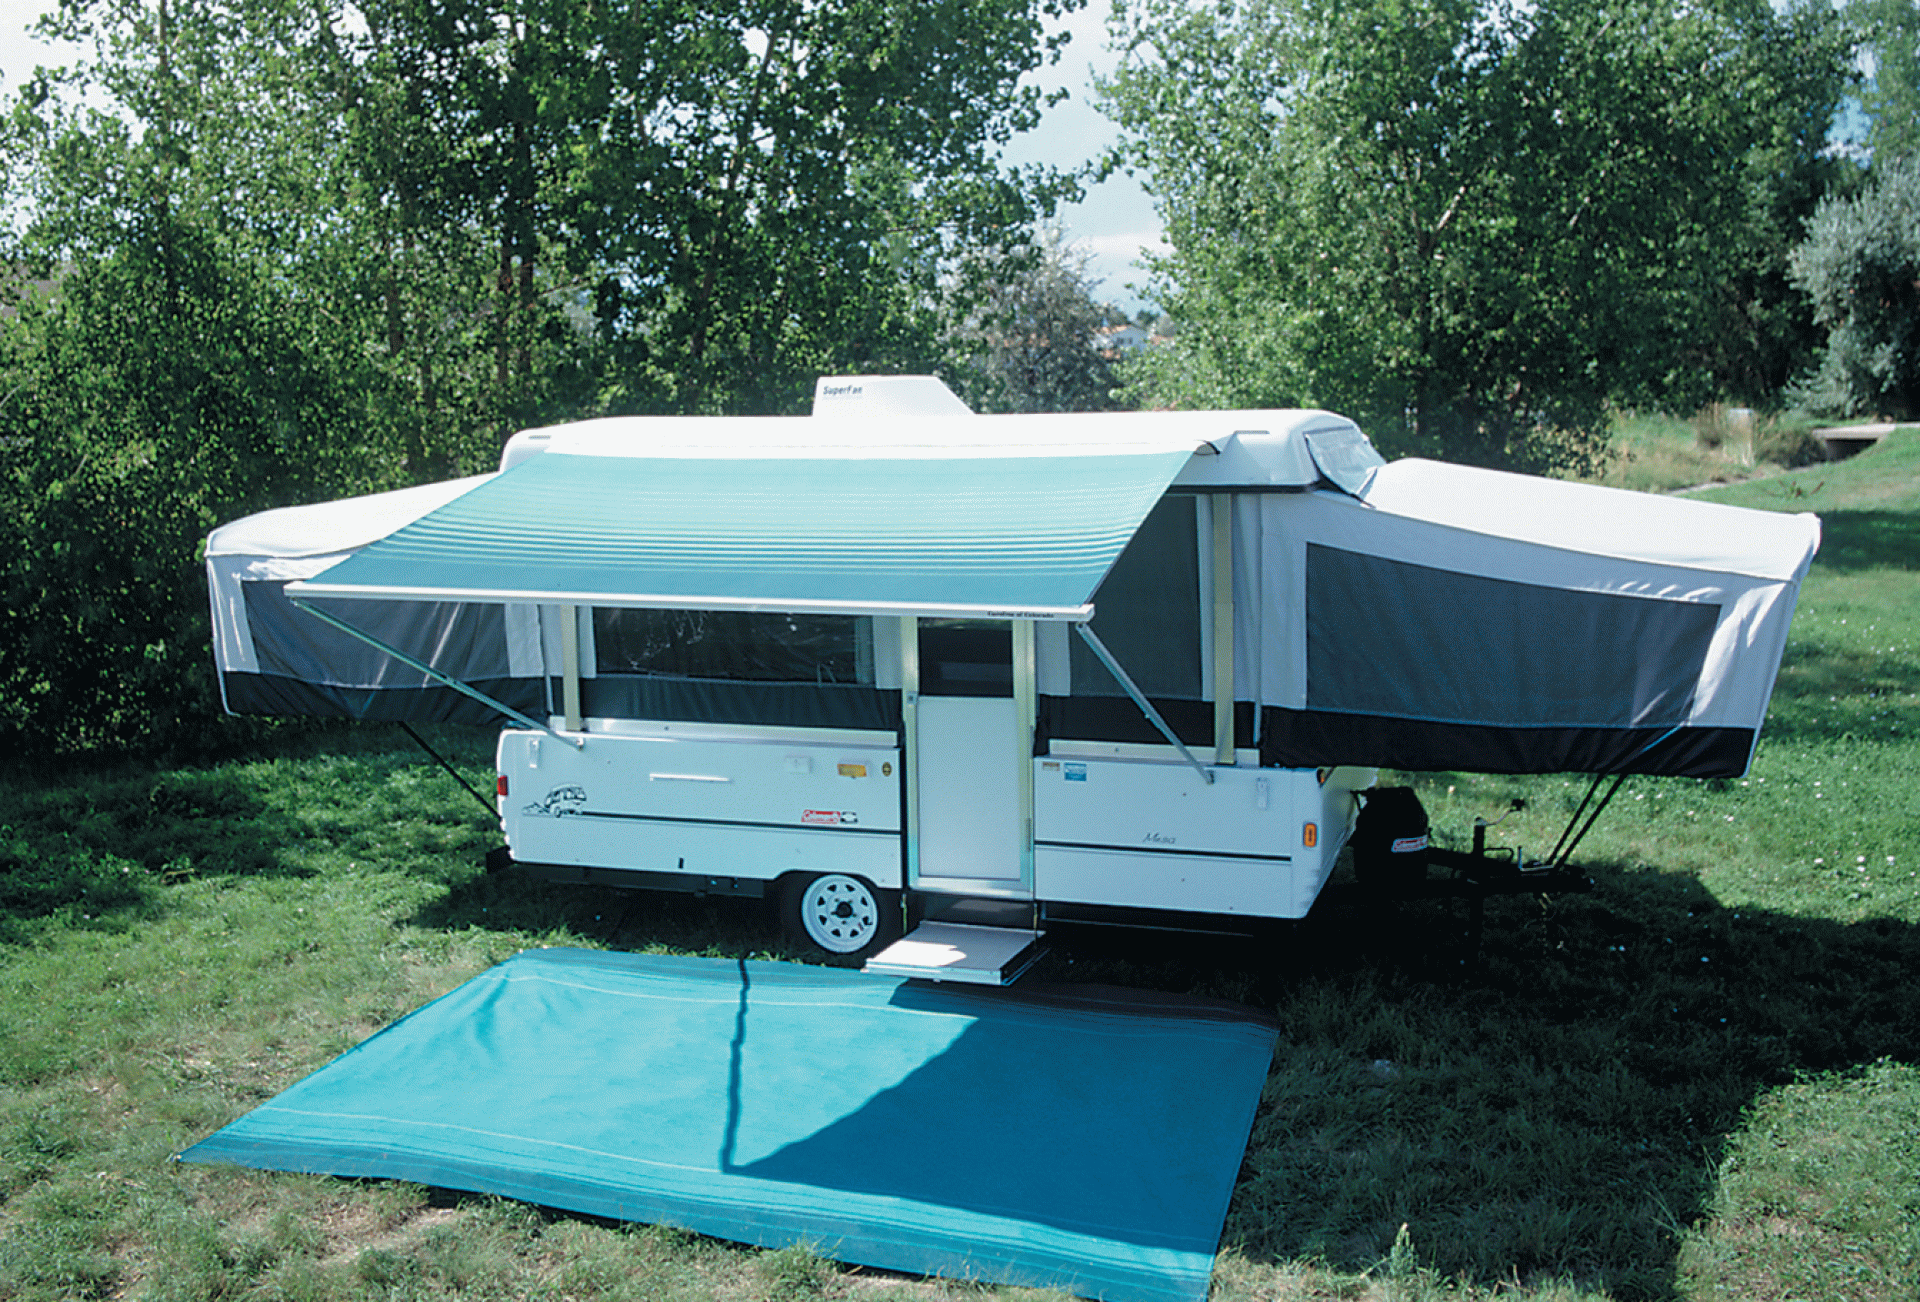 CAREFREE OF COLORADO | 981578C00 | Campout Awning Metric 4.0 Metric 13' 1" Teal Dune Stripe With White Bag